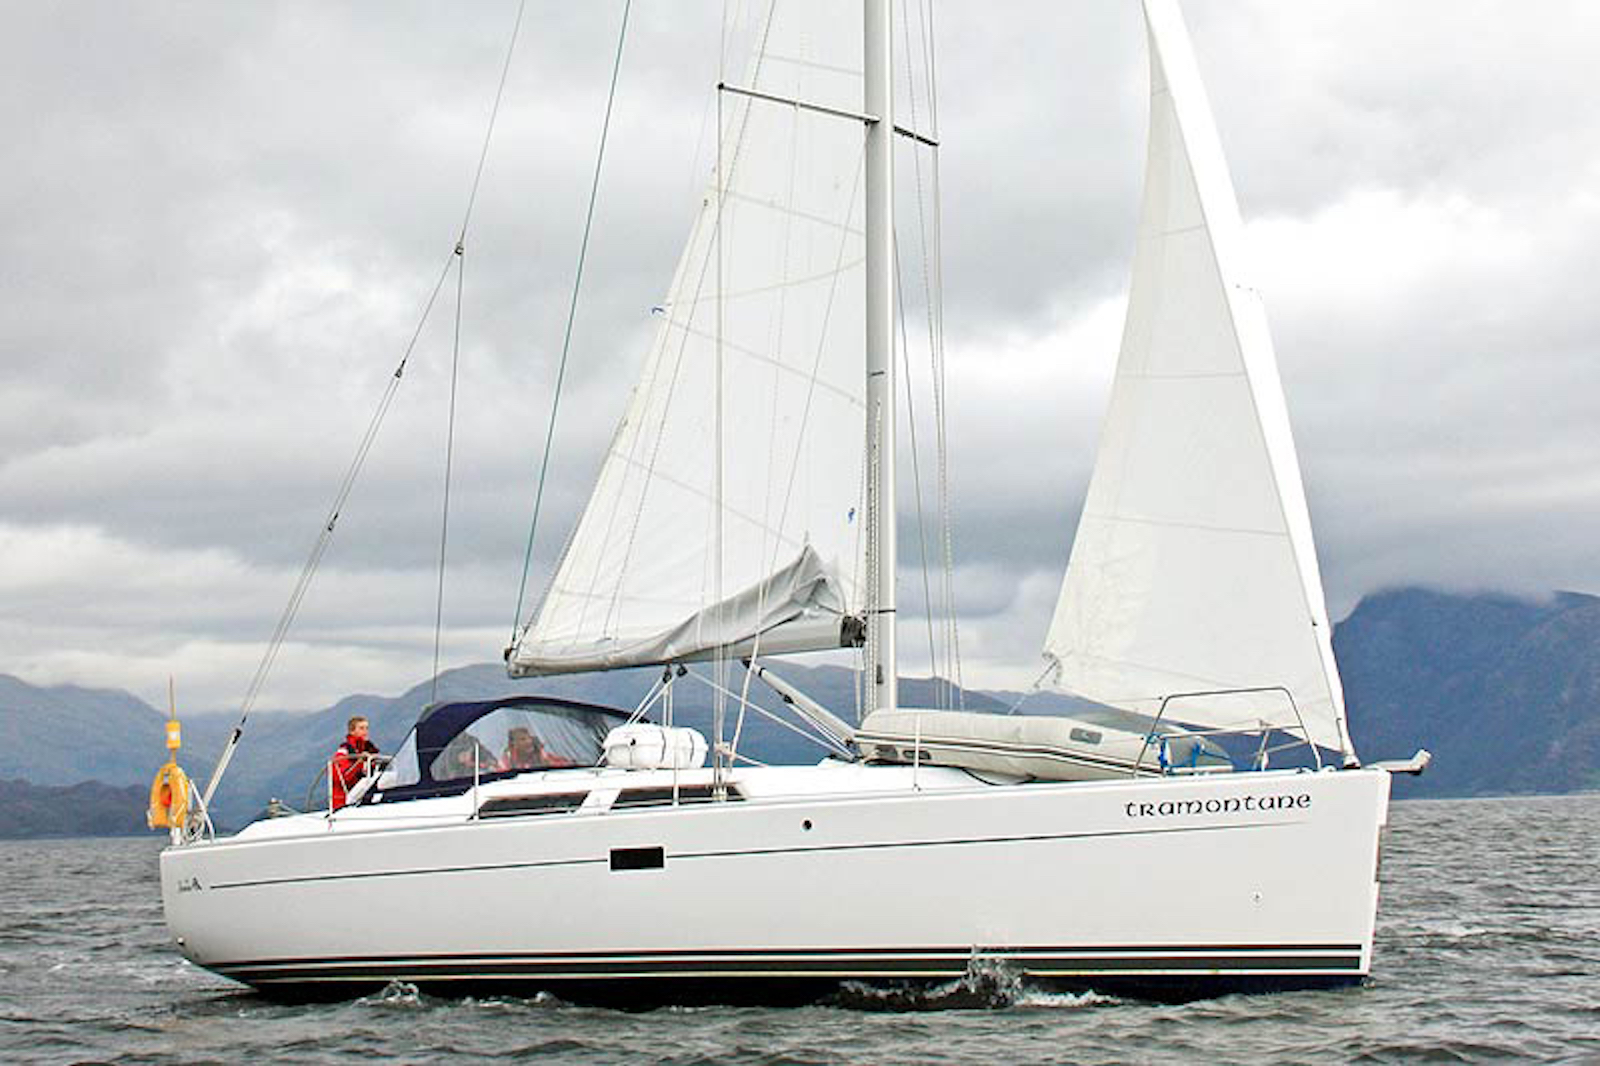 Hanse 400 - Yacht Charter Largs & Boat hire in United Kingdom Scotland Firth of Clyde Largs Largs Yacht Haven 1